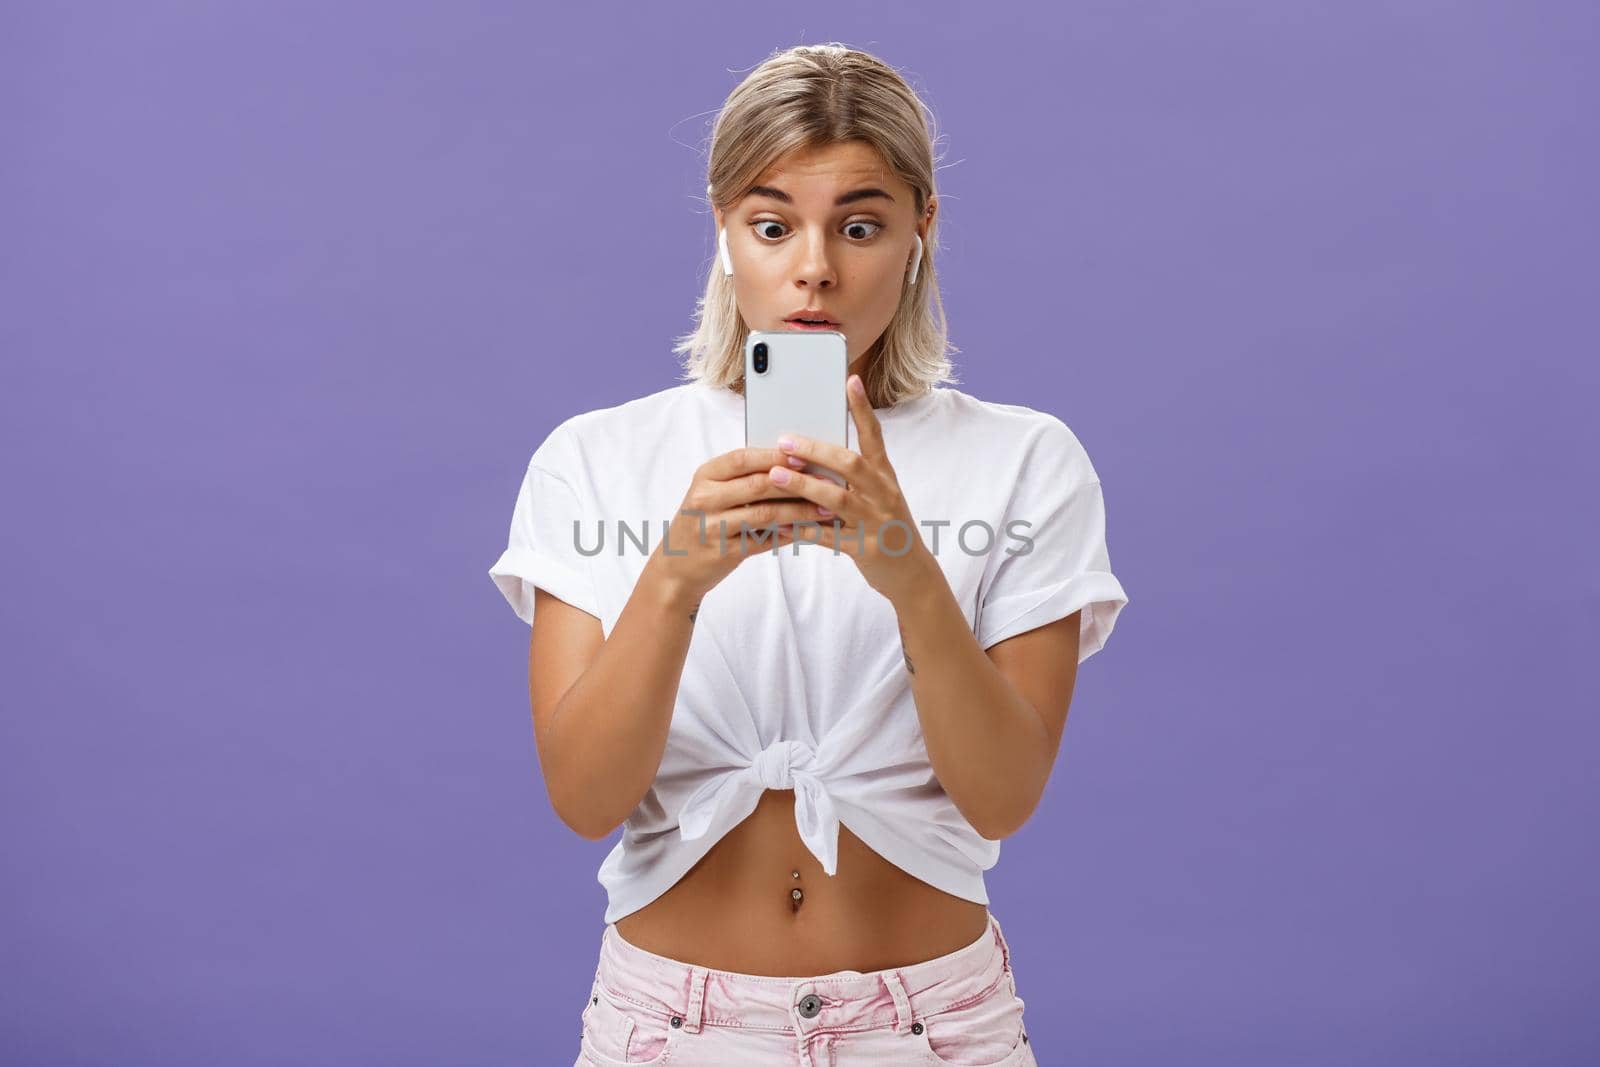 Girl watching thrilling video on social media in wireless earphones holding smartphone near face popping eyes at smartphone screen gazing at gadget with interest and curiosity over purple background. Technology concept